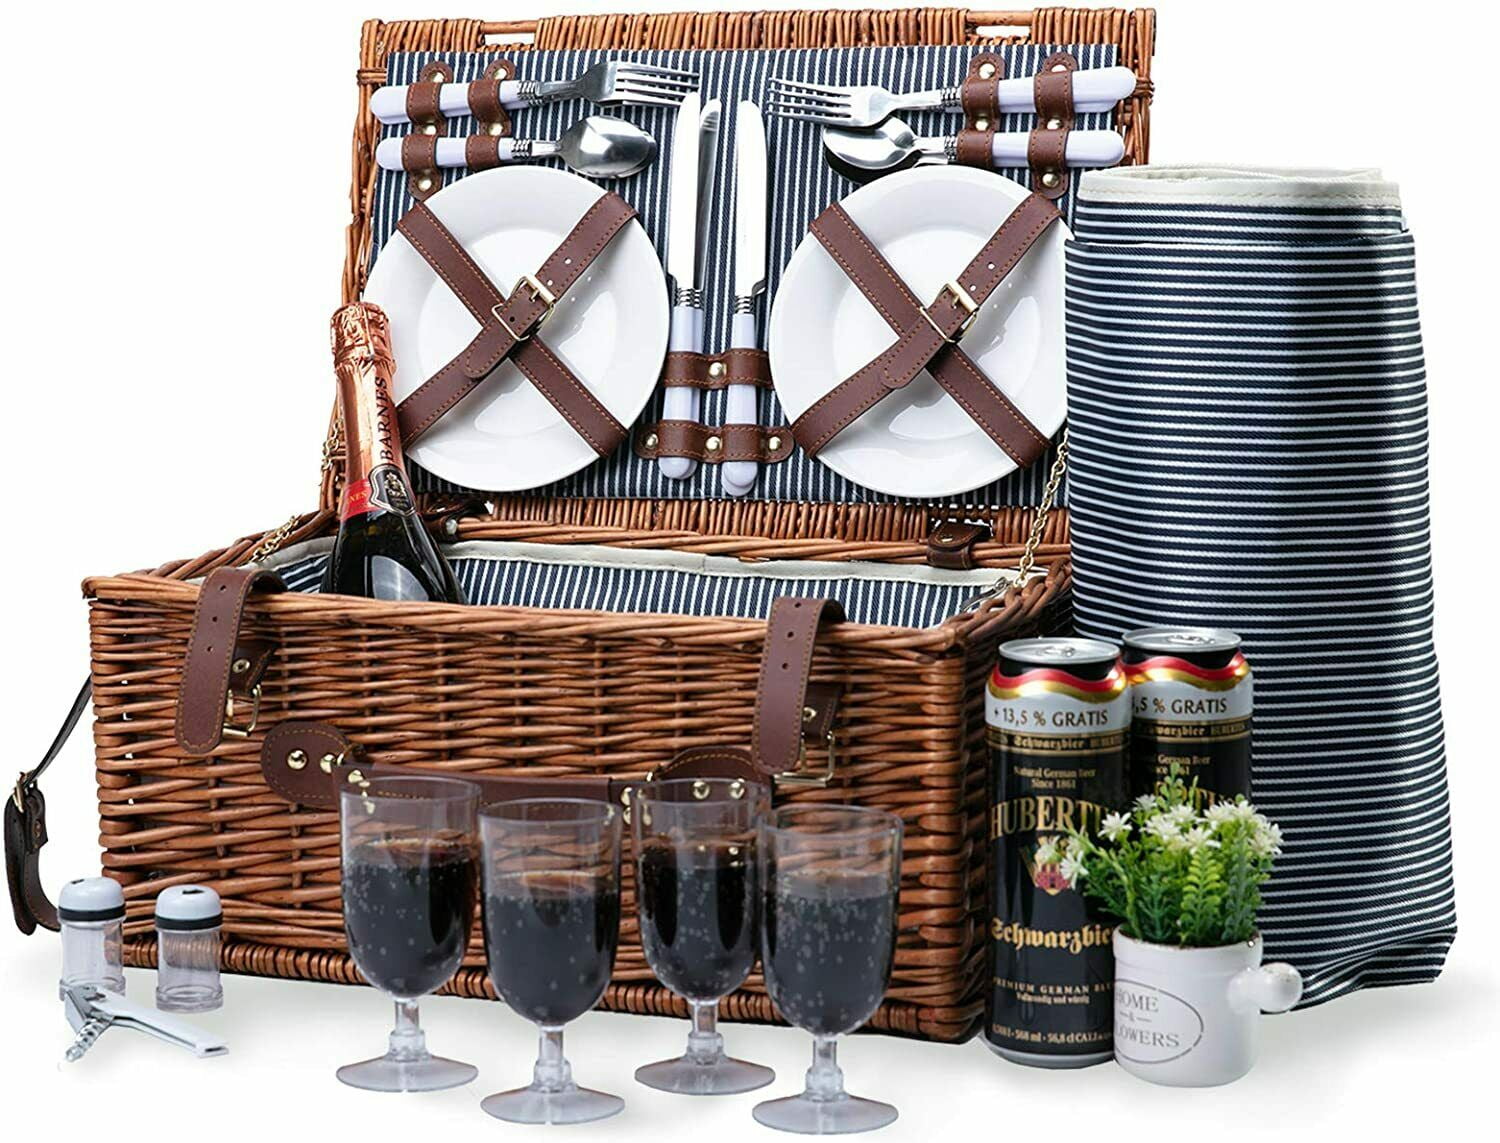 Large Willow Hamper Set with Insulated Compartment Perfect for Picnicking Camping Handmade Large Wicker Picnic Basket Set with Utensils Cutlery or any Other Outdoor Event 4 Person Picnic Basket 